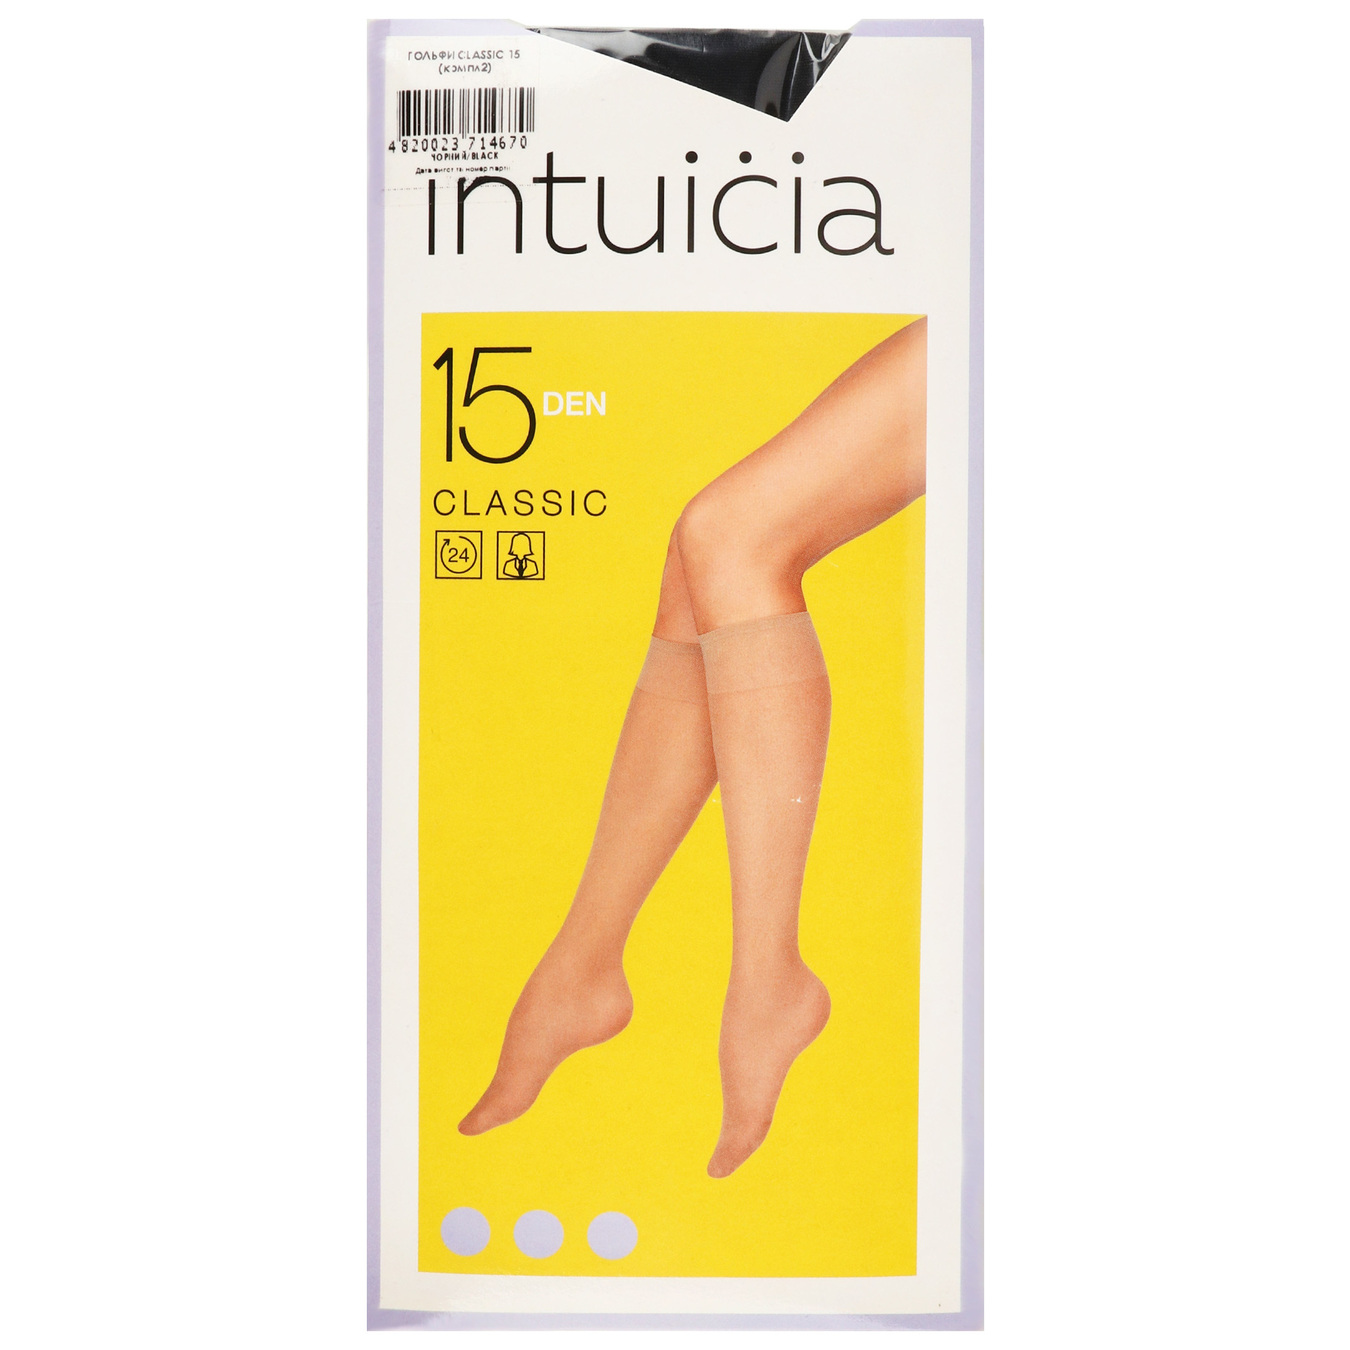 Half-stockings Intuition Classic Black women's 15den 2 pairs